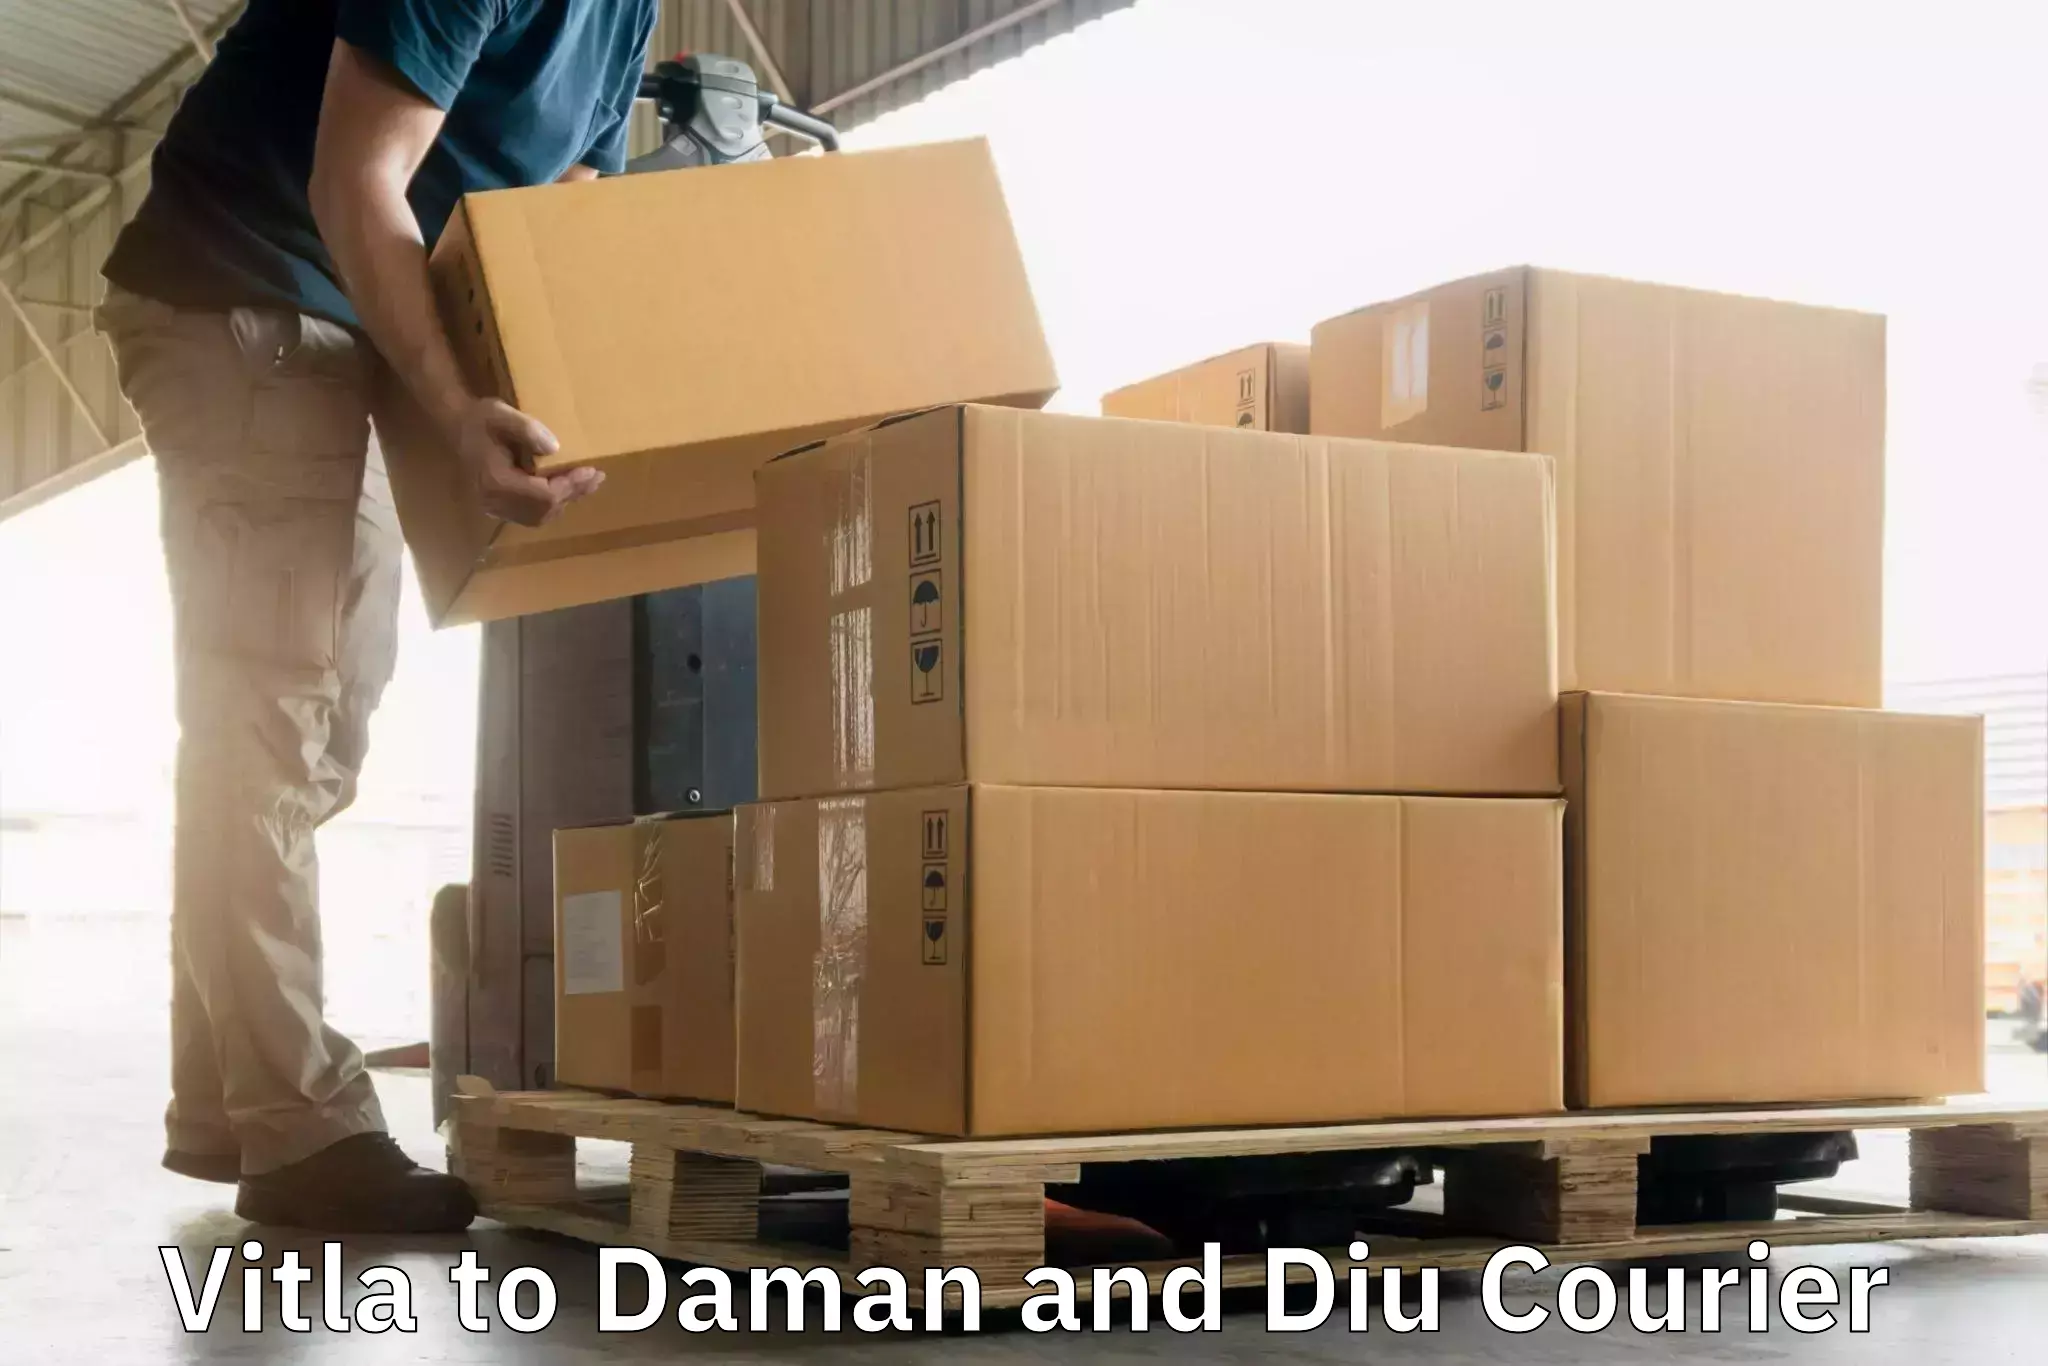 Residential courier service Vitla to Daman and Diu